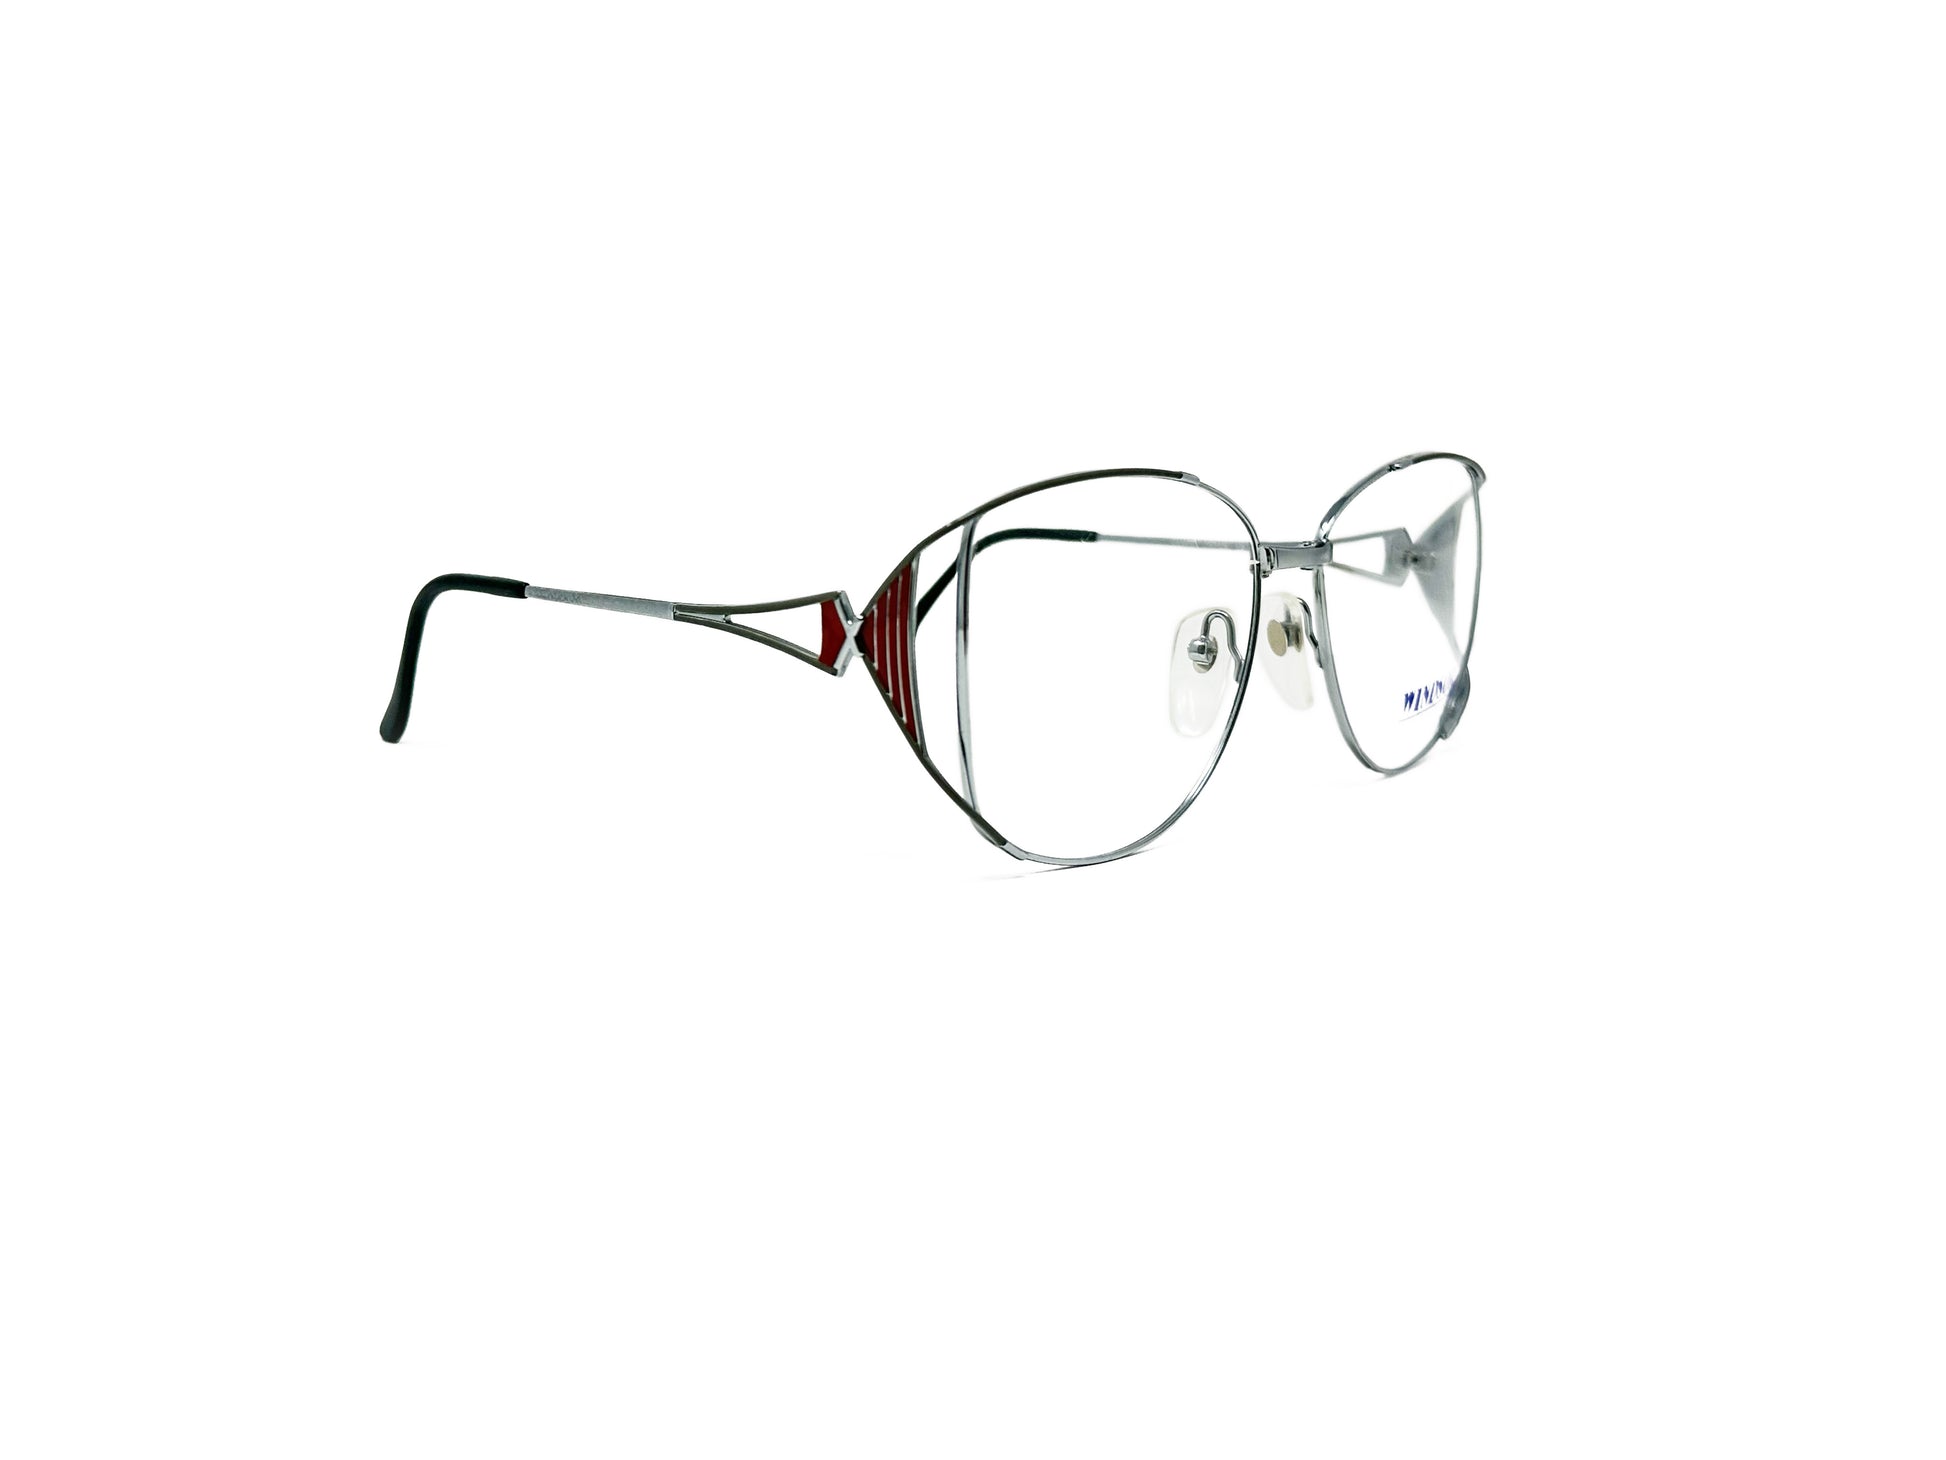 Windsor Optical metal butterfly optical frame. Curved top and bottom with straighter sides and wire cut-outModel: Tetra. Color: GR- Silver. Side view.